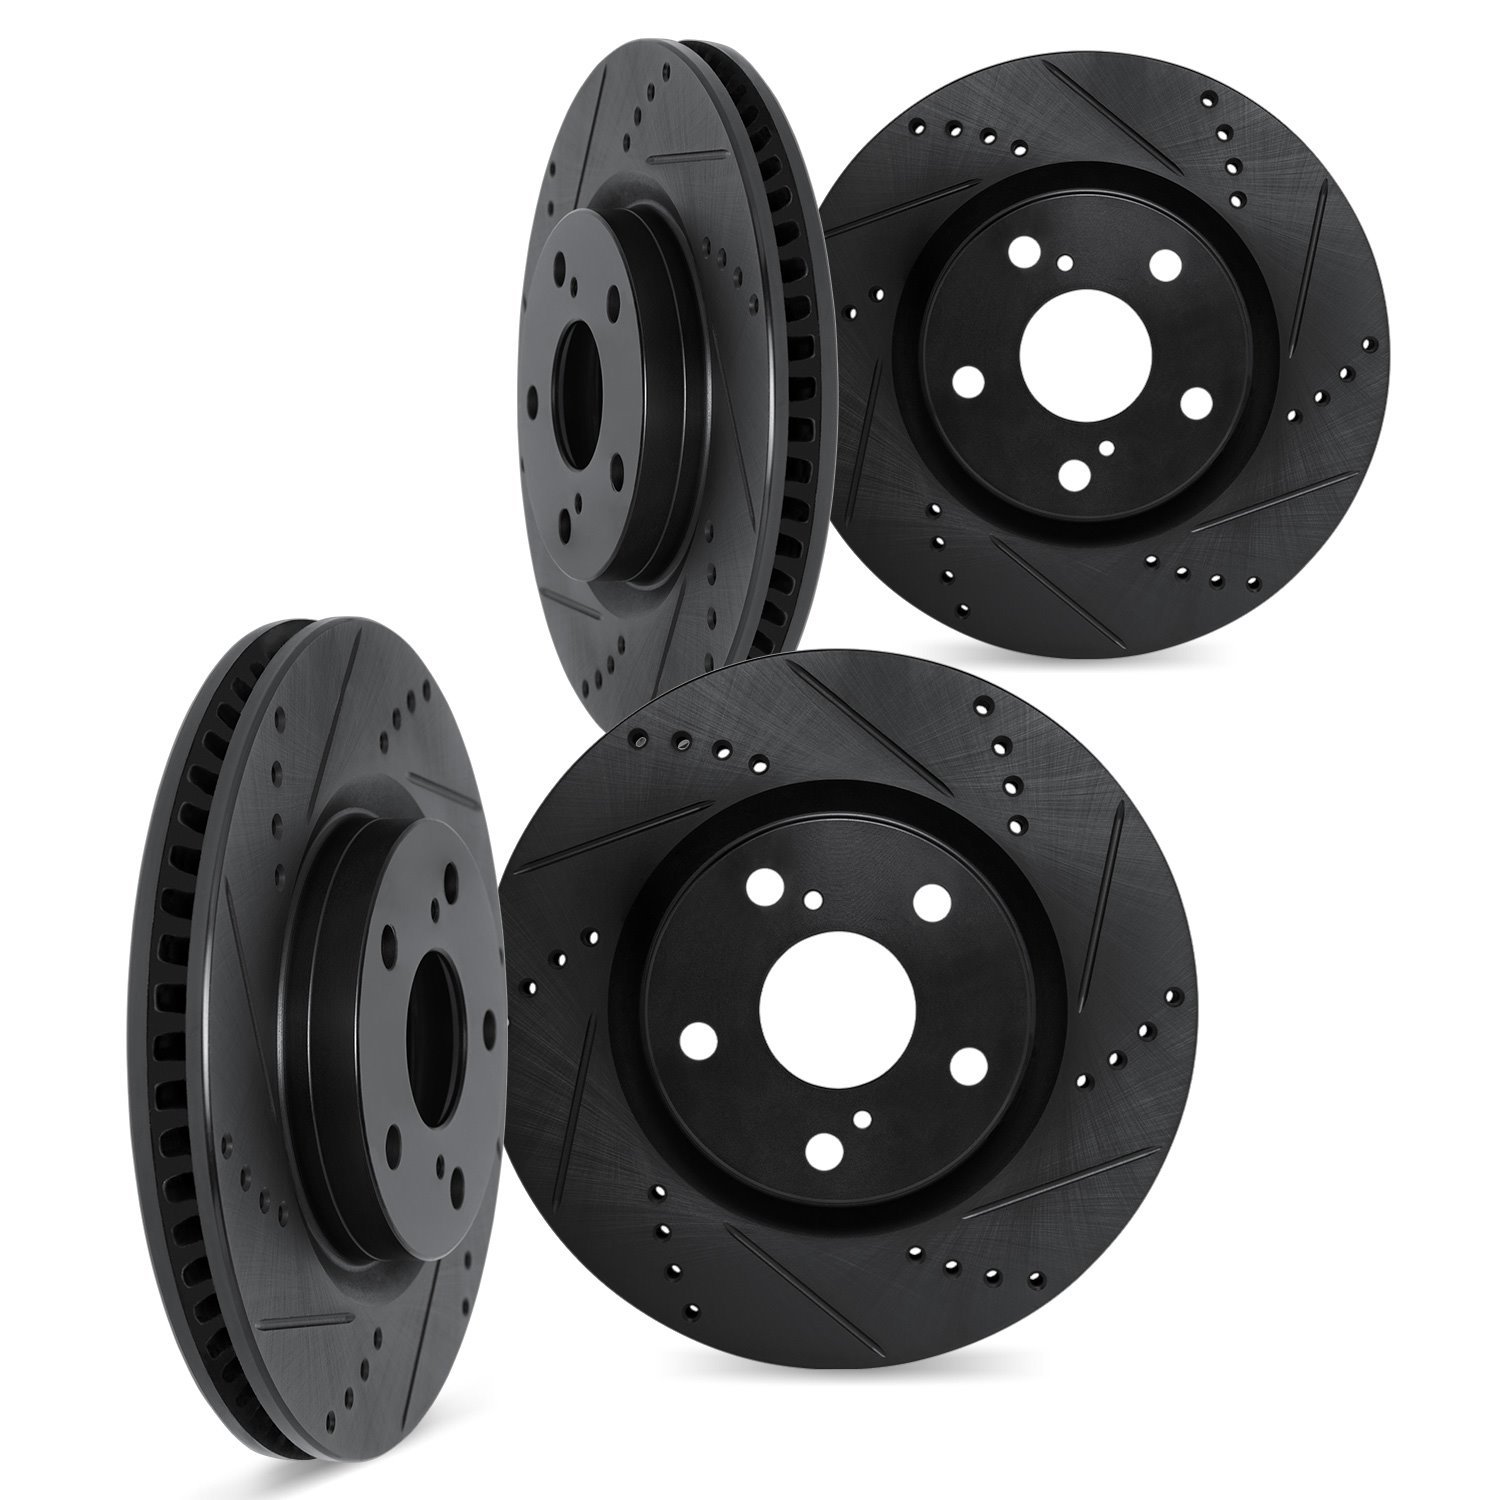 8004-11021 Drilled/Slotted Brake Rotors [Black], 2010-2012 Land Rover, Position: Front and Rear